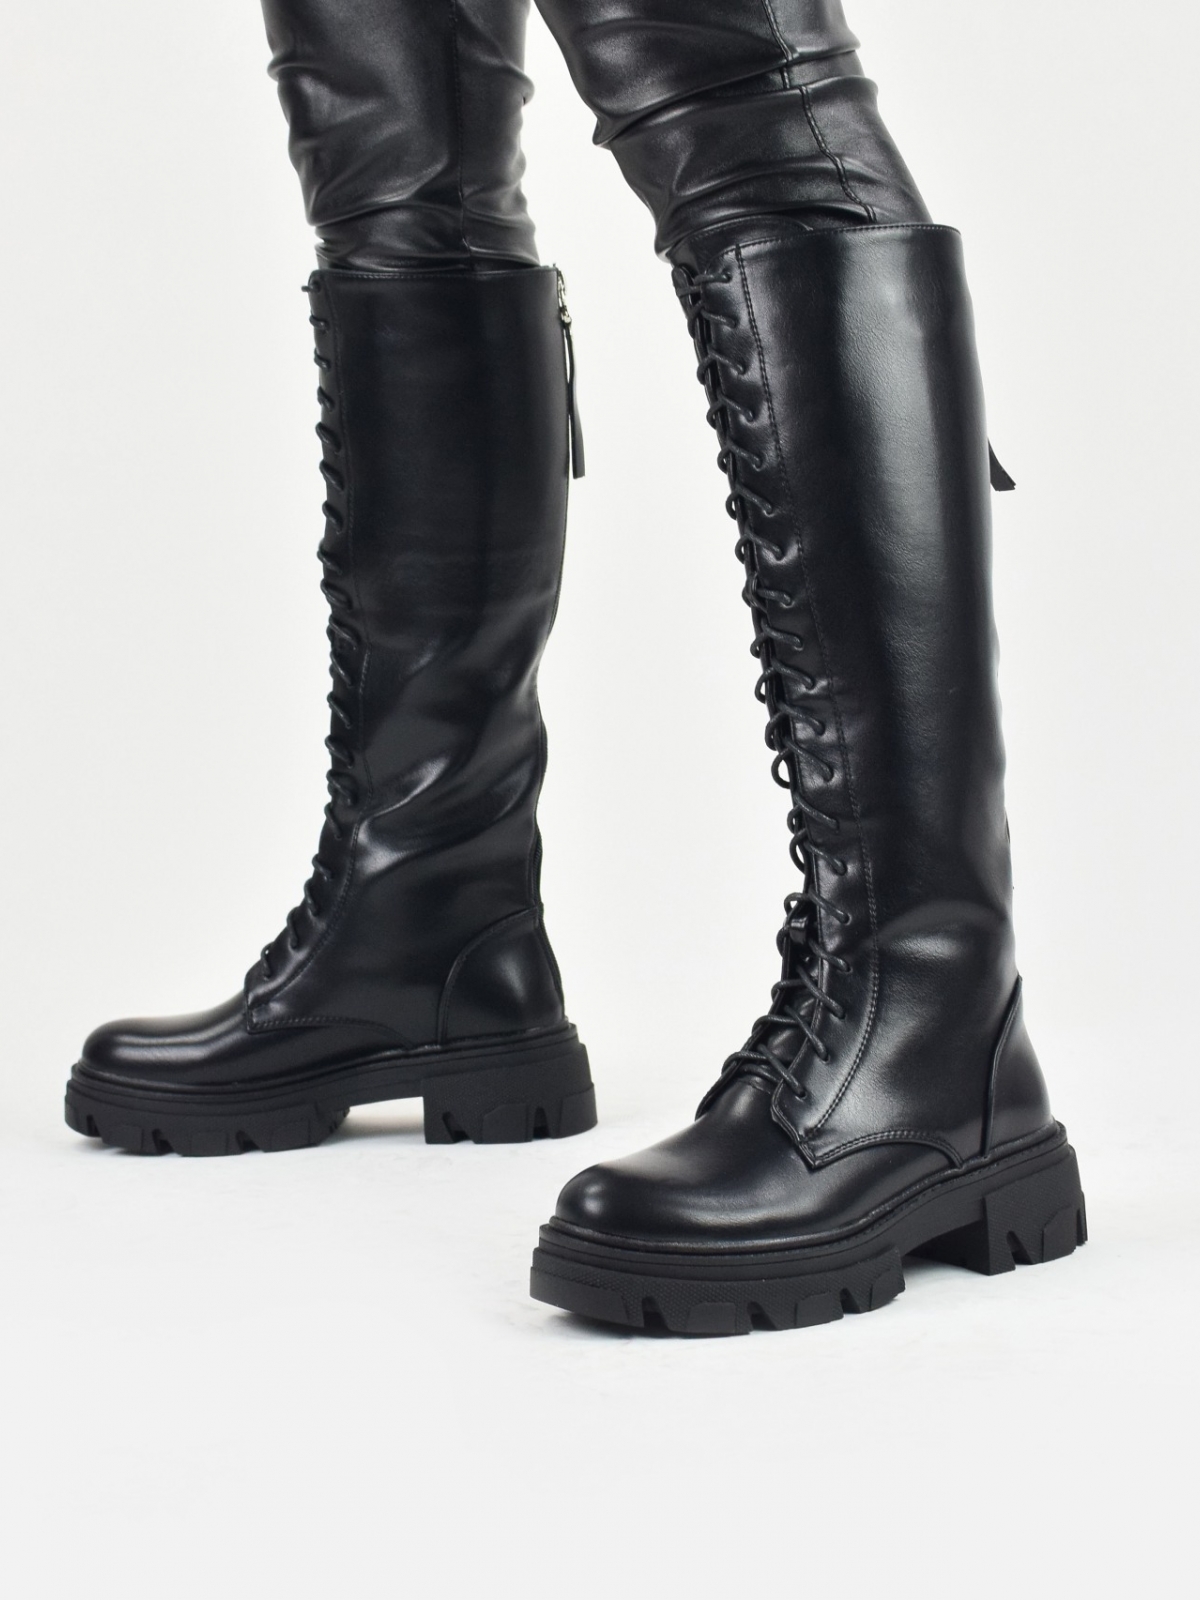 Chunky lace up knee high boots with back zipper in black